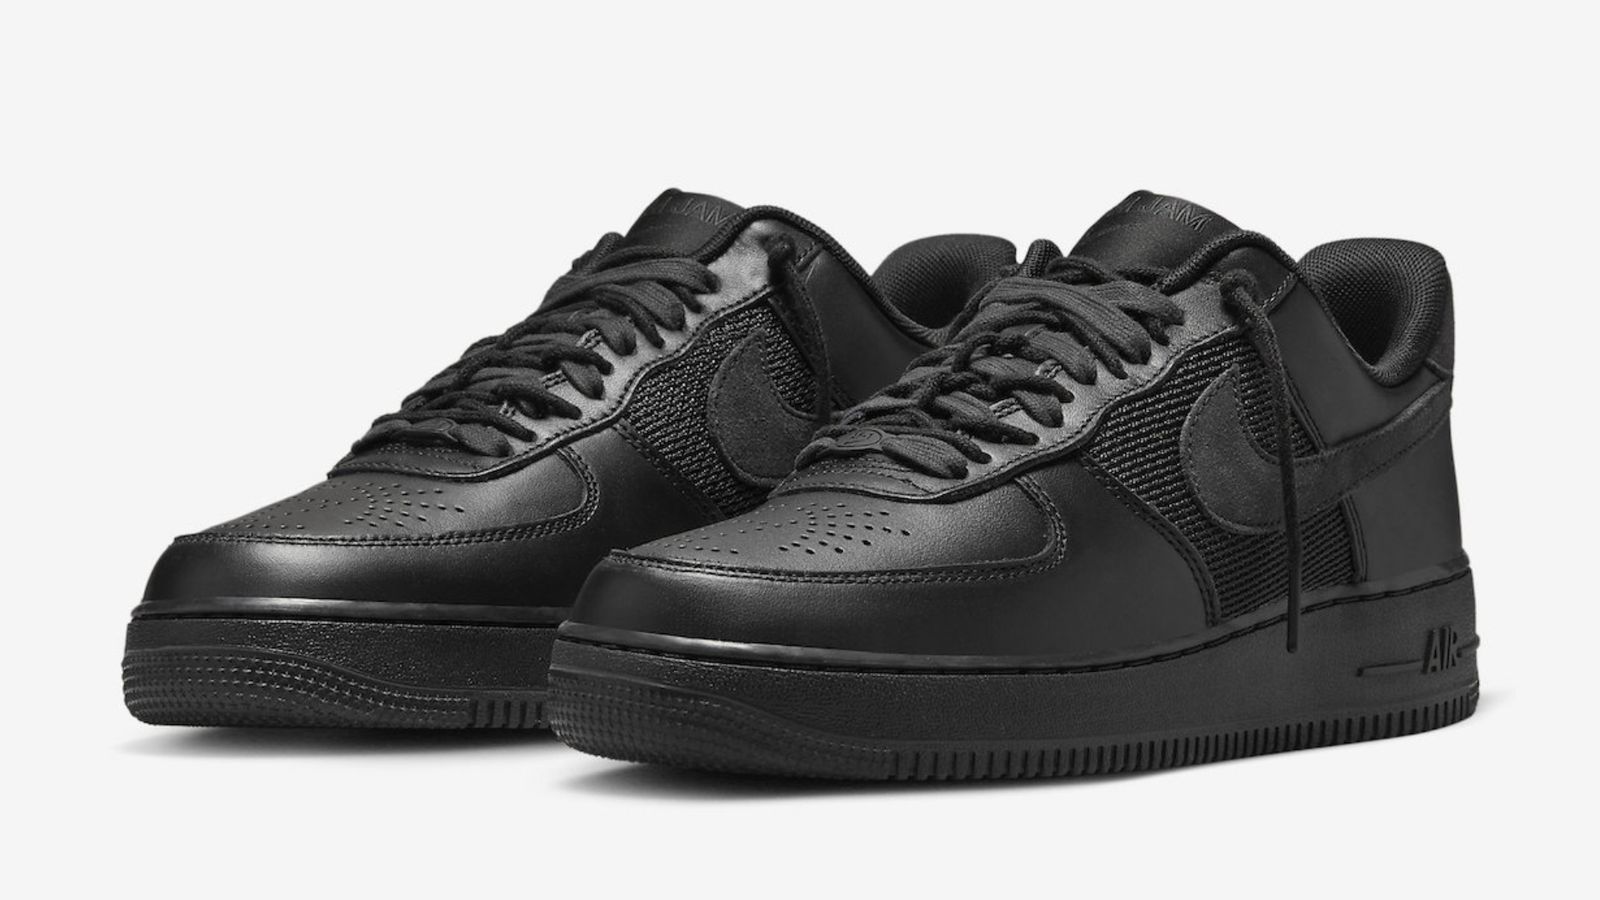 Slam Jam x Nike Air Force 1 Low "Black" product image of an all-black low-top with mesh and leather panels.